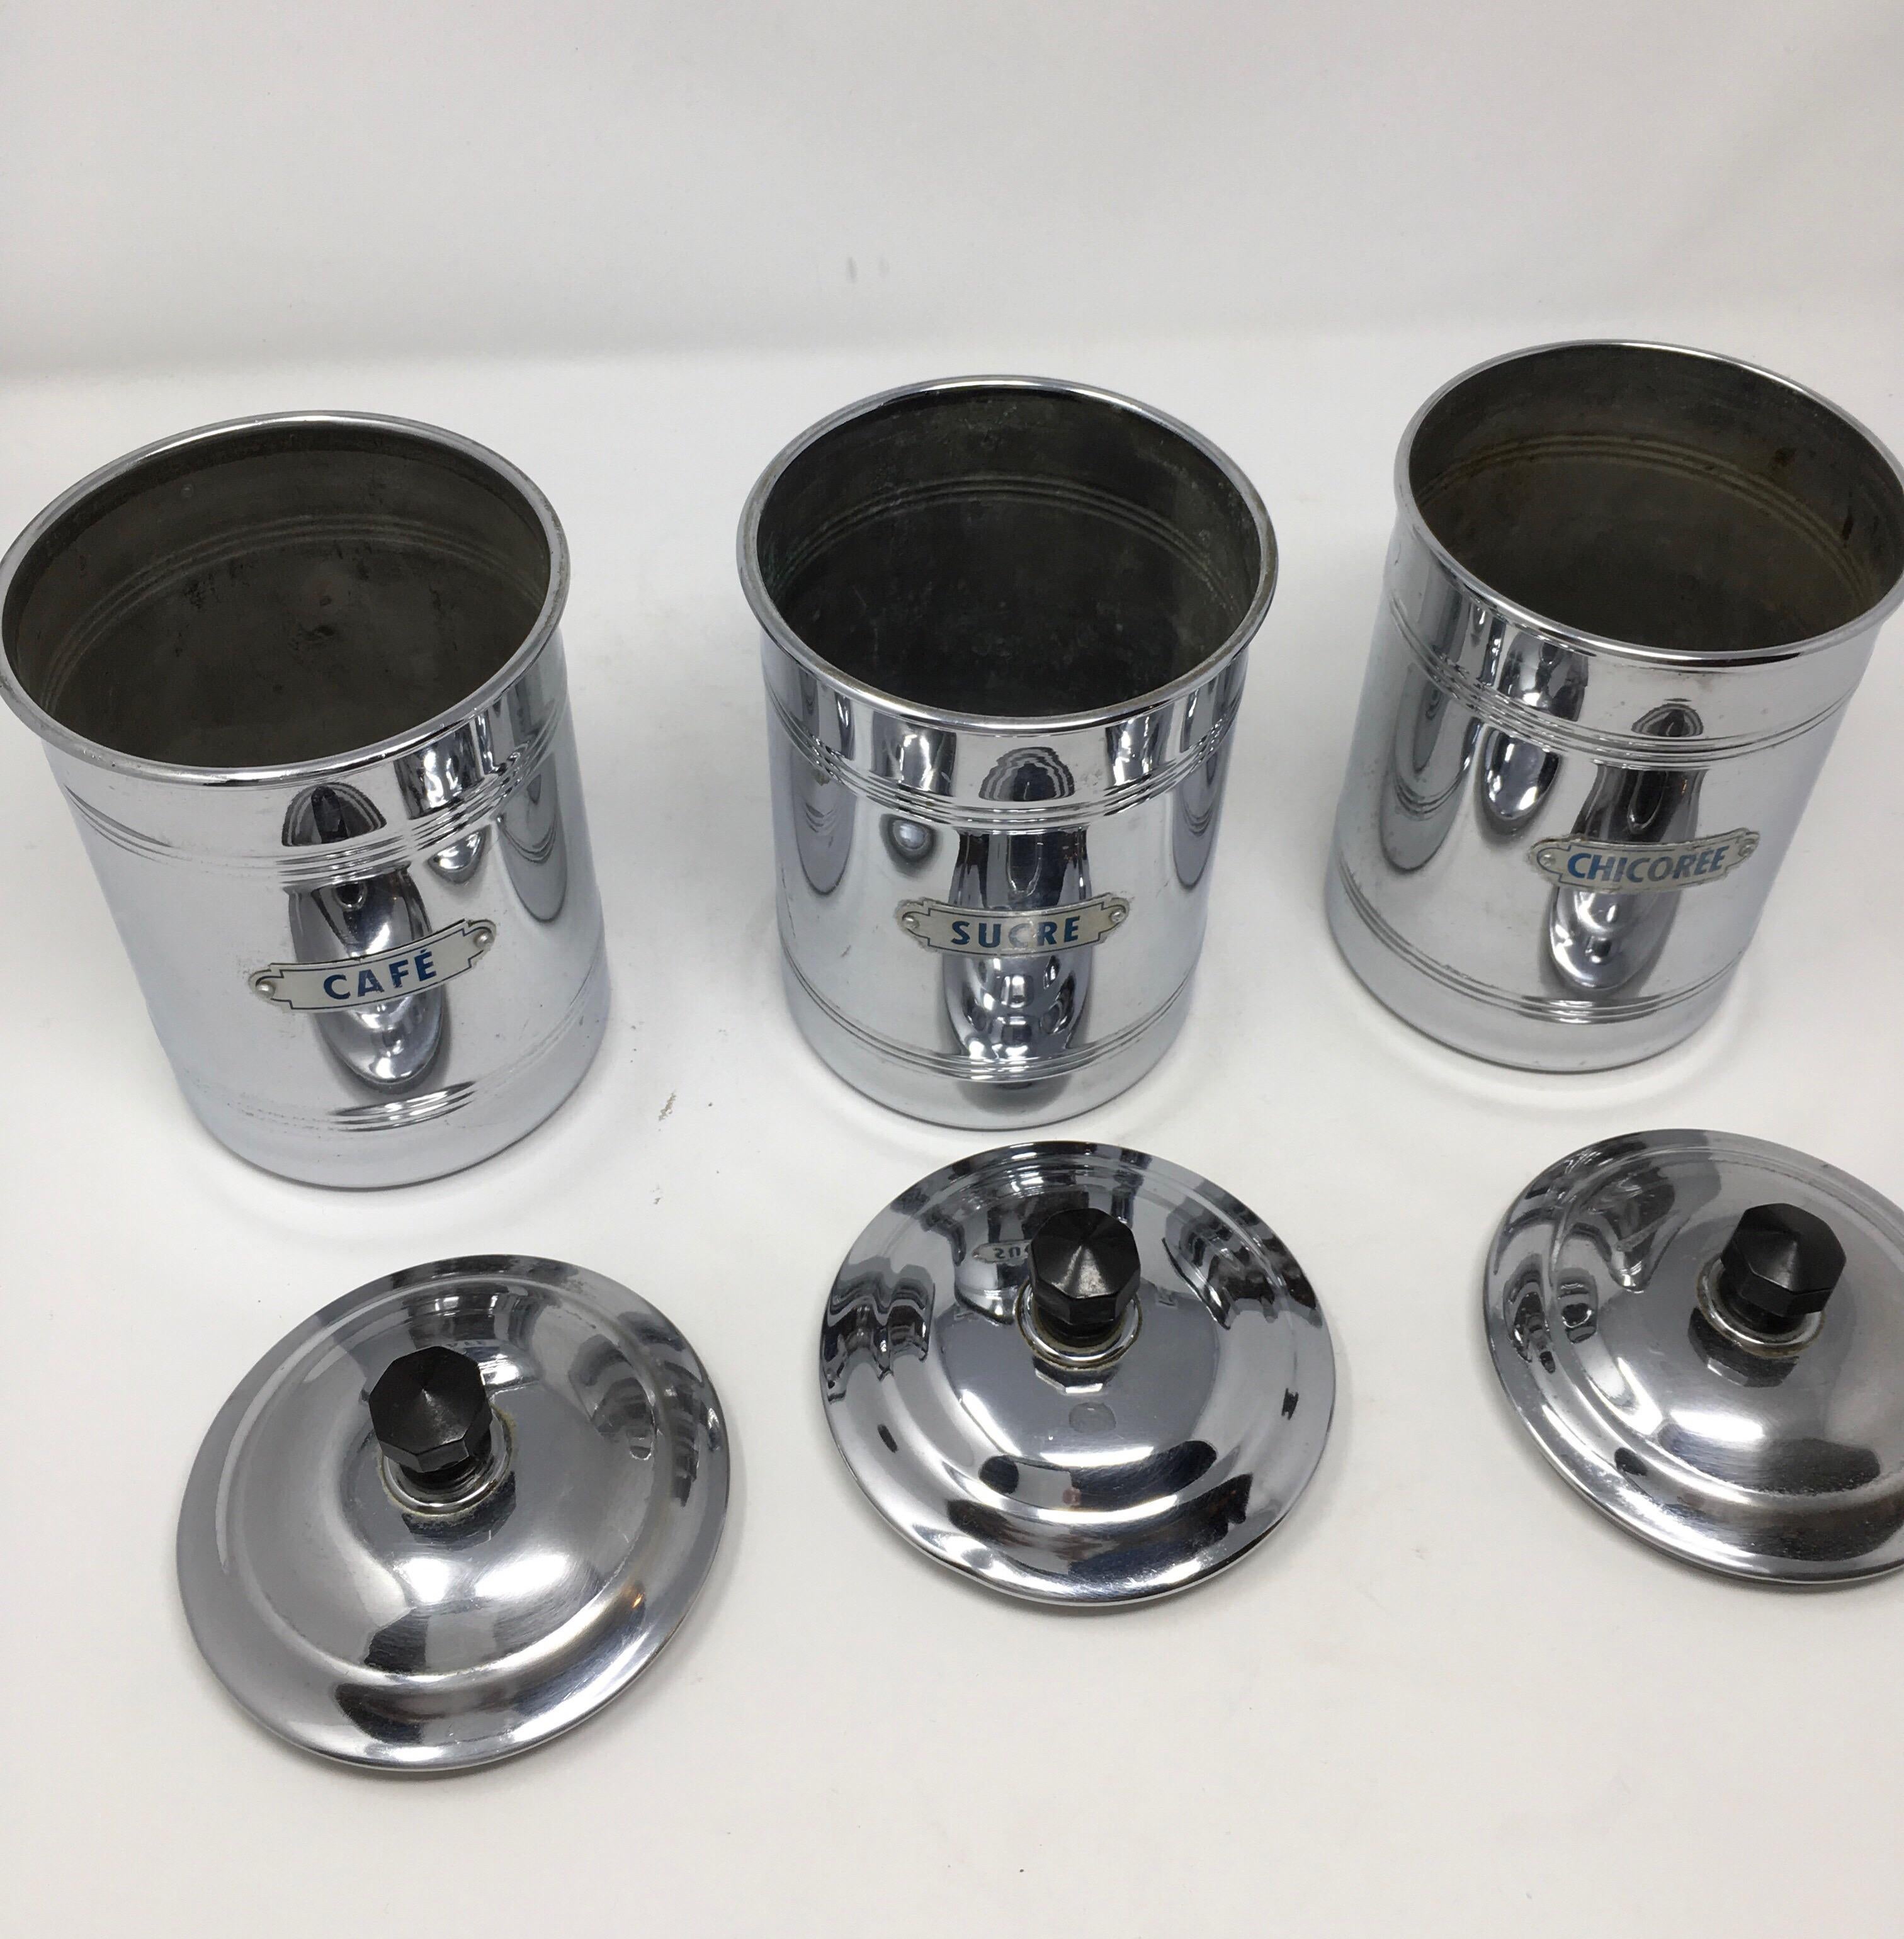 20th Century Antique Three-Piece French Aluminum Coffee Set of Canisters, circa 1920s